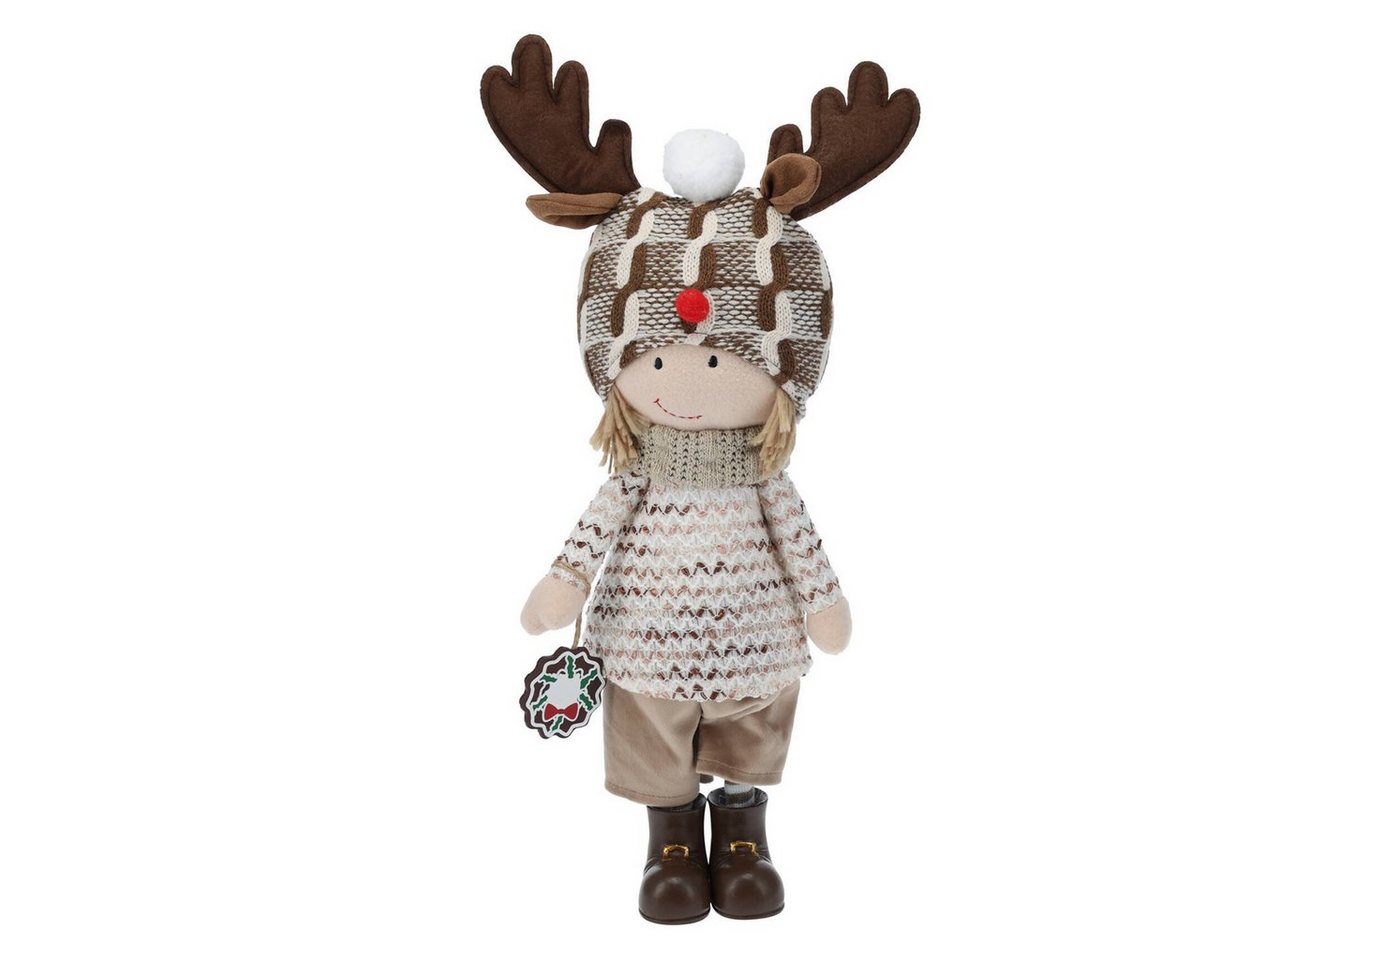 Home & styling collection Weihnachtsfigur Weihnachtsfigur von Home & styling collection